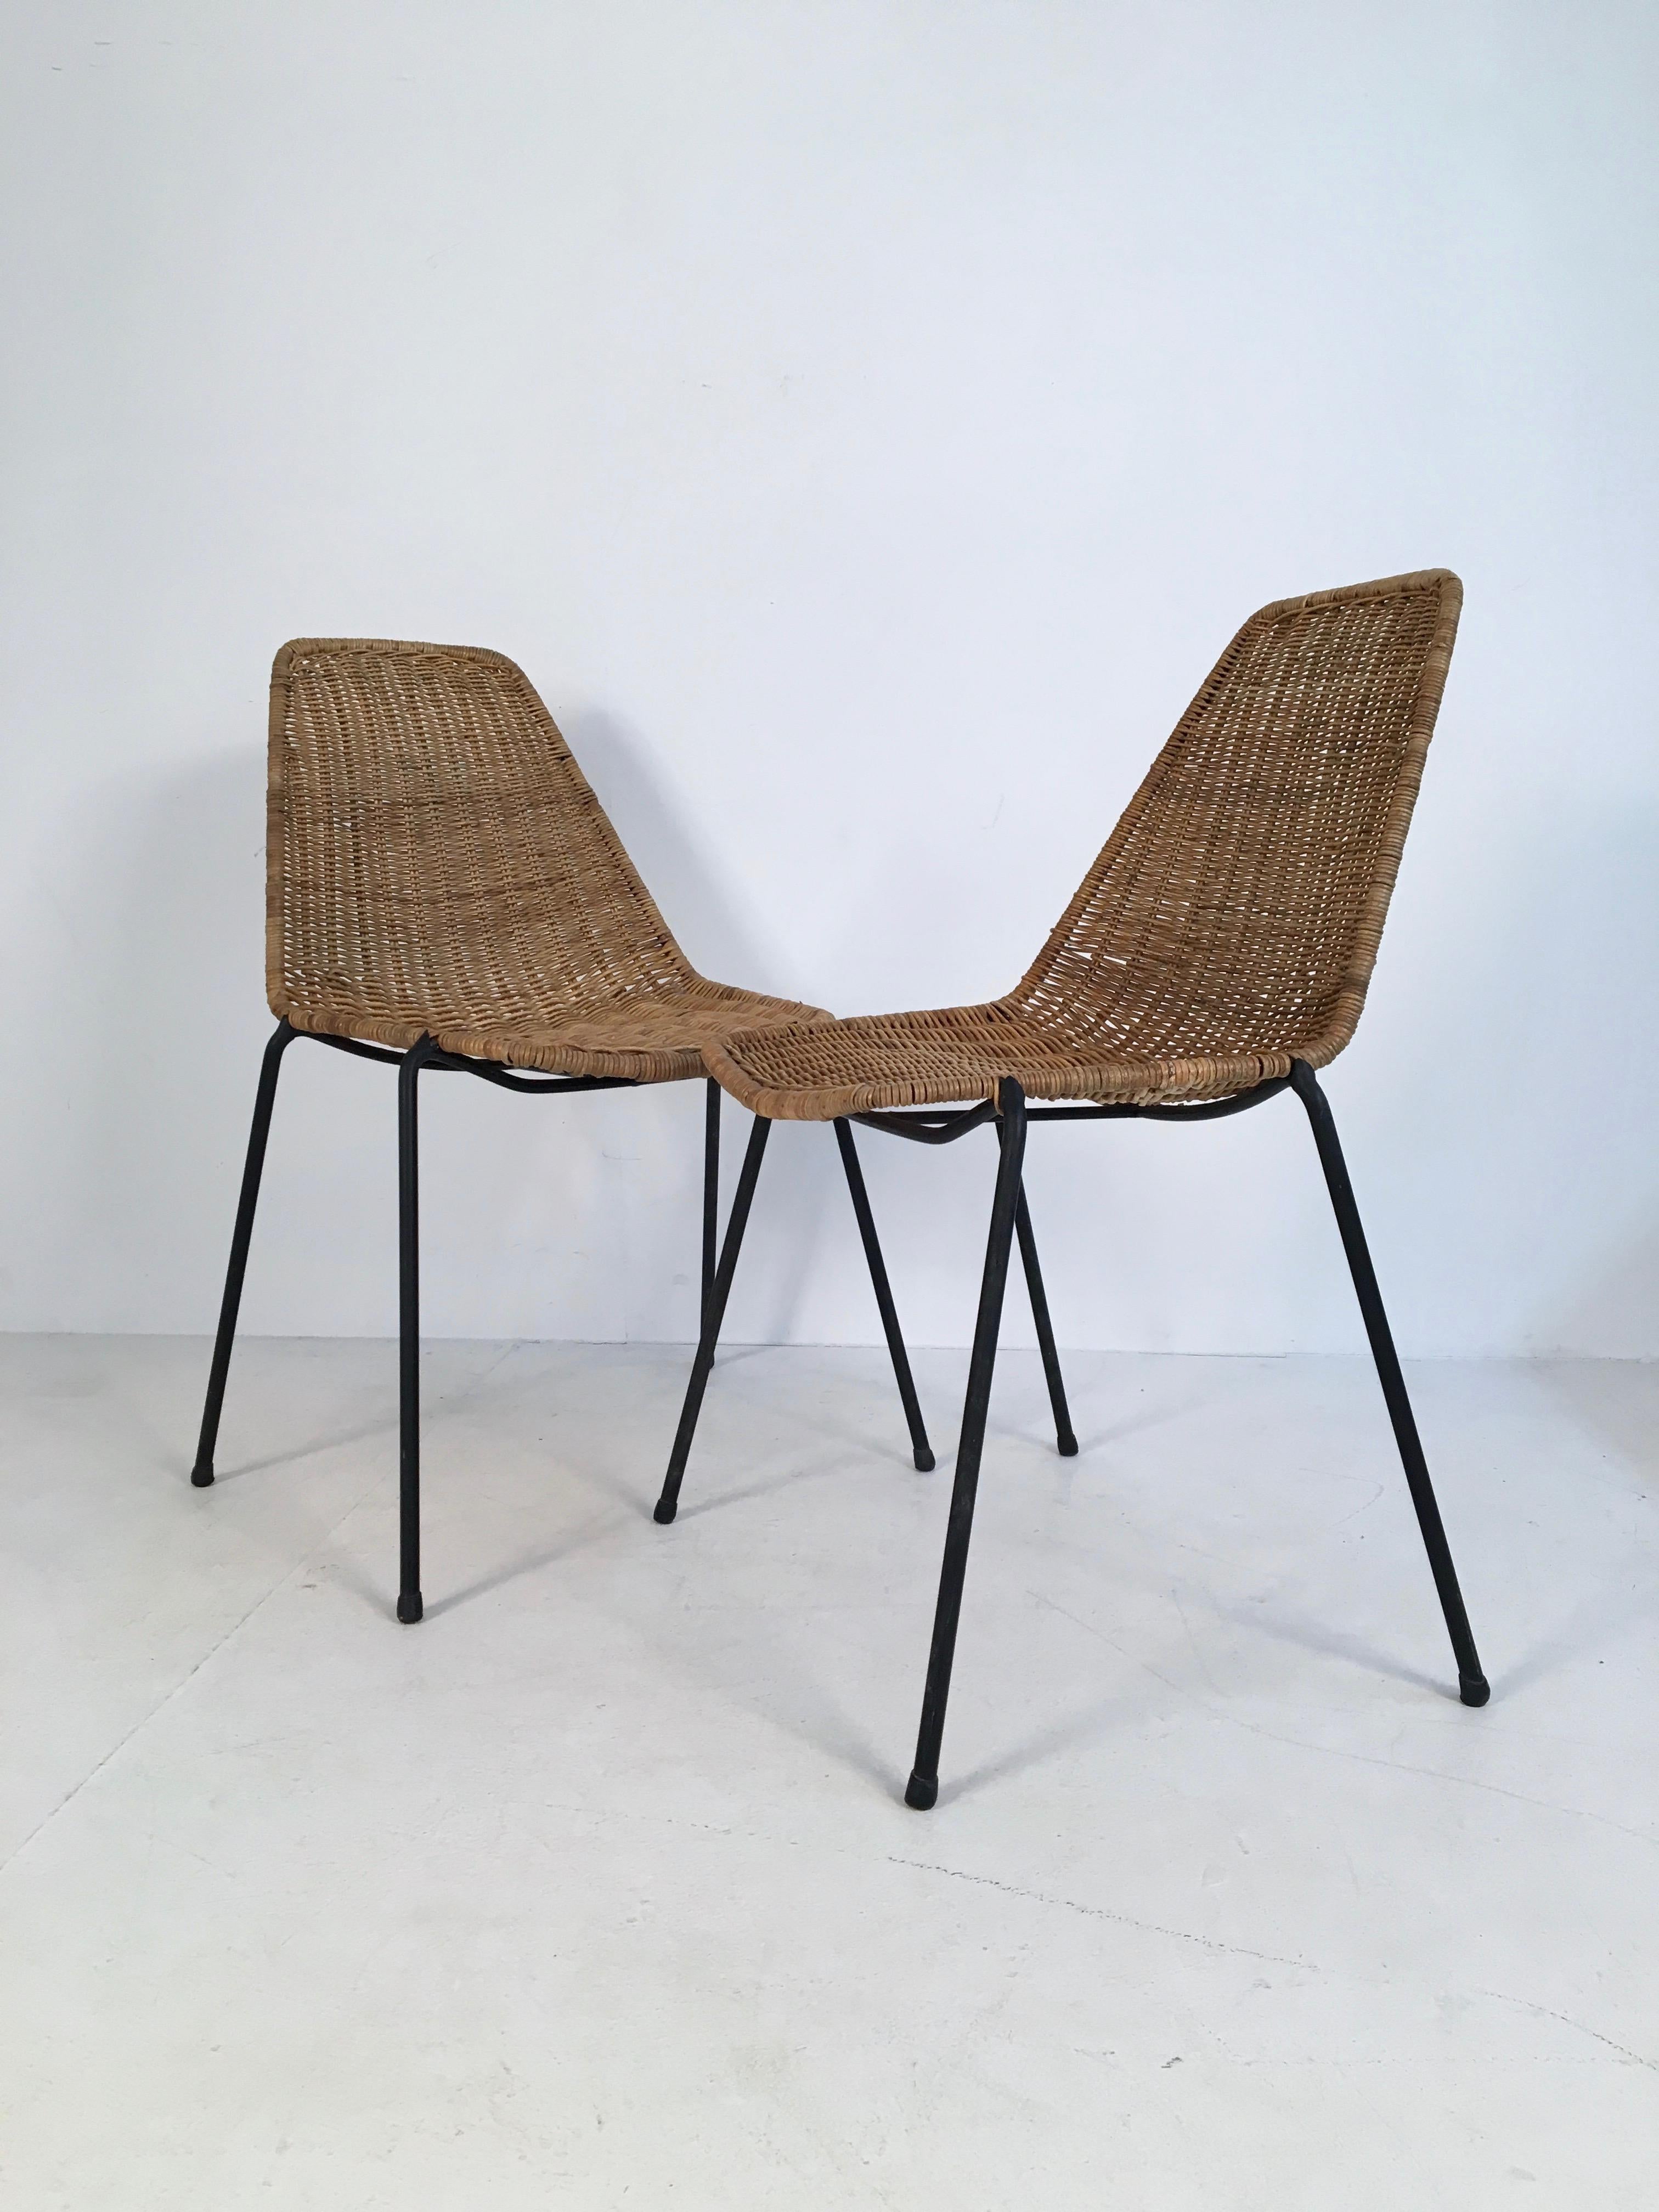 Pair of exquisite wicker and iron chairs by Franco Campo & Carlo Graffi for Home Torino, Italy, circa 1950.

The pair are in great condition with a minor repair made to one of the chairs by a revered specialist basket weaver.